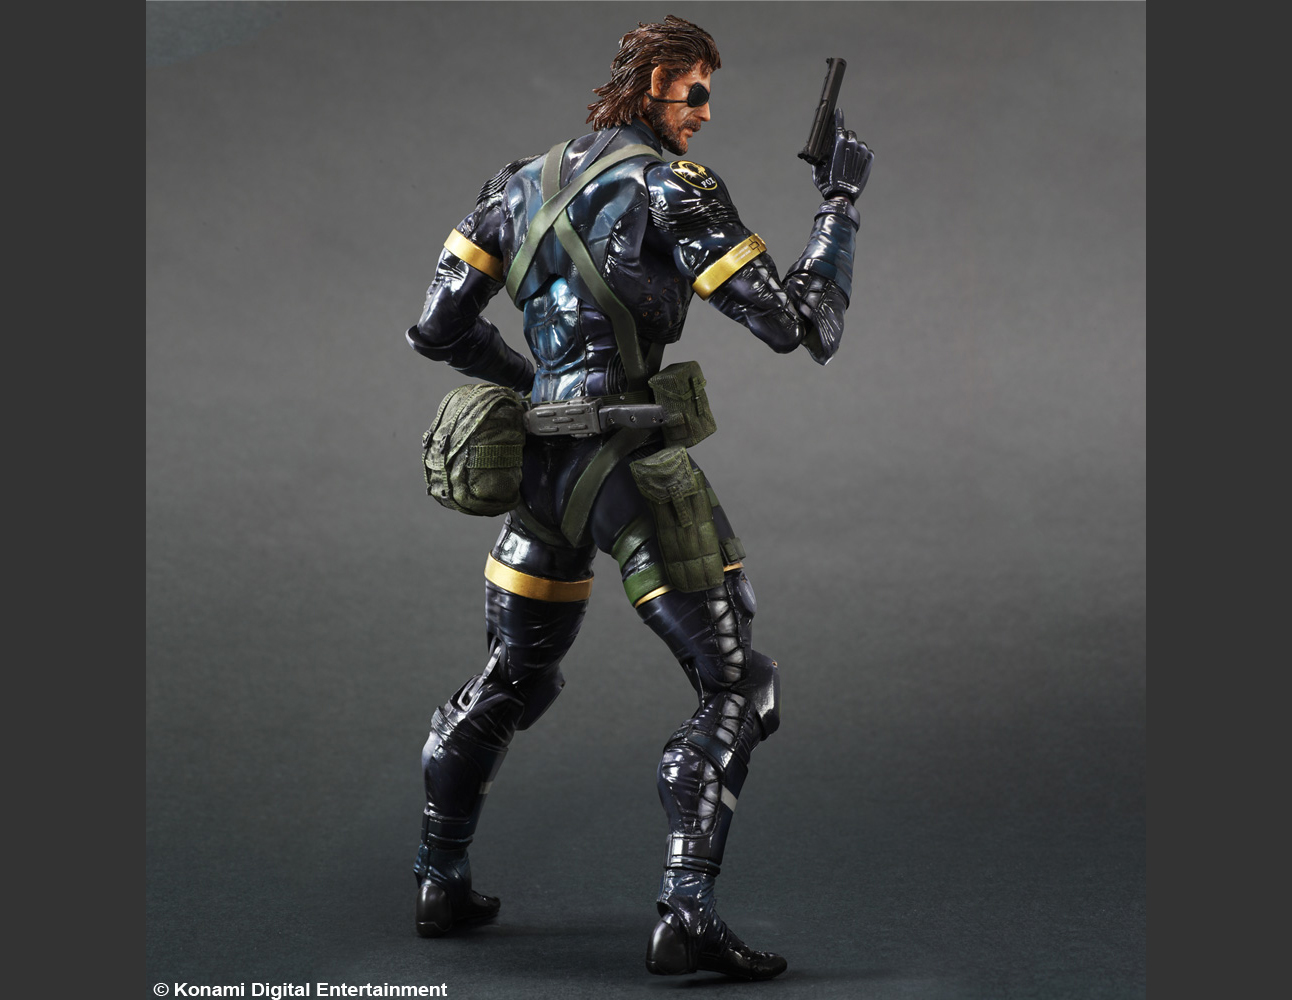 Play Arts Kai - Metal Gear Solid 5 Ground Zeroes - Snake